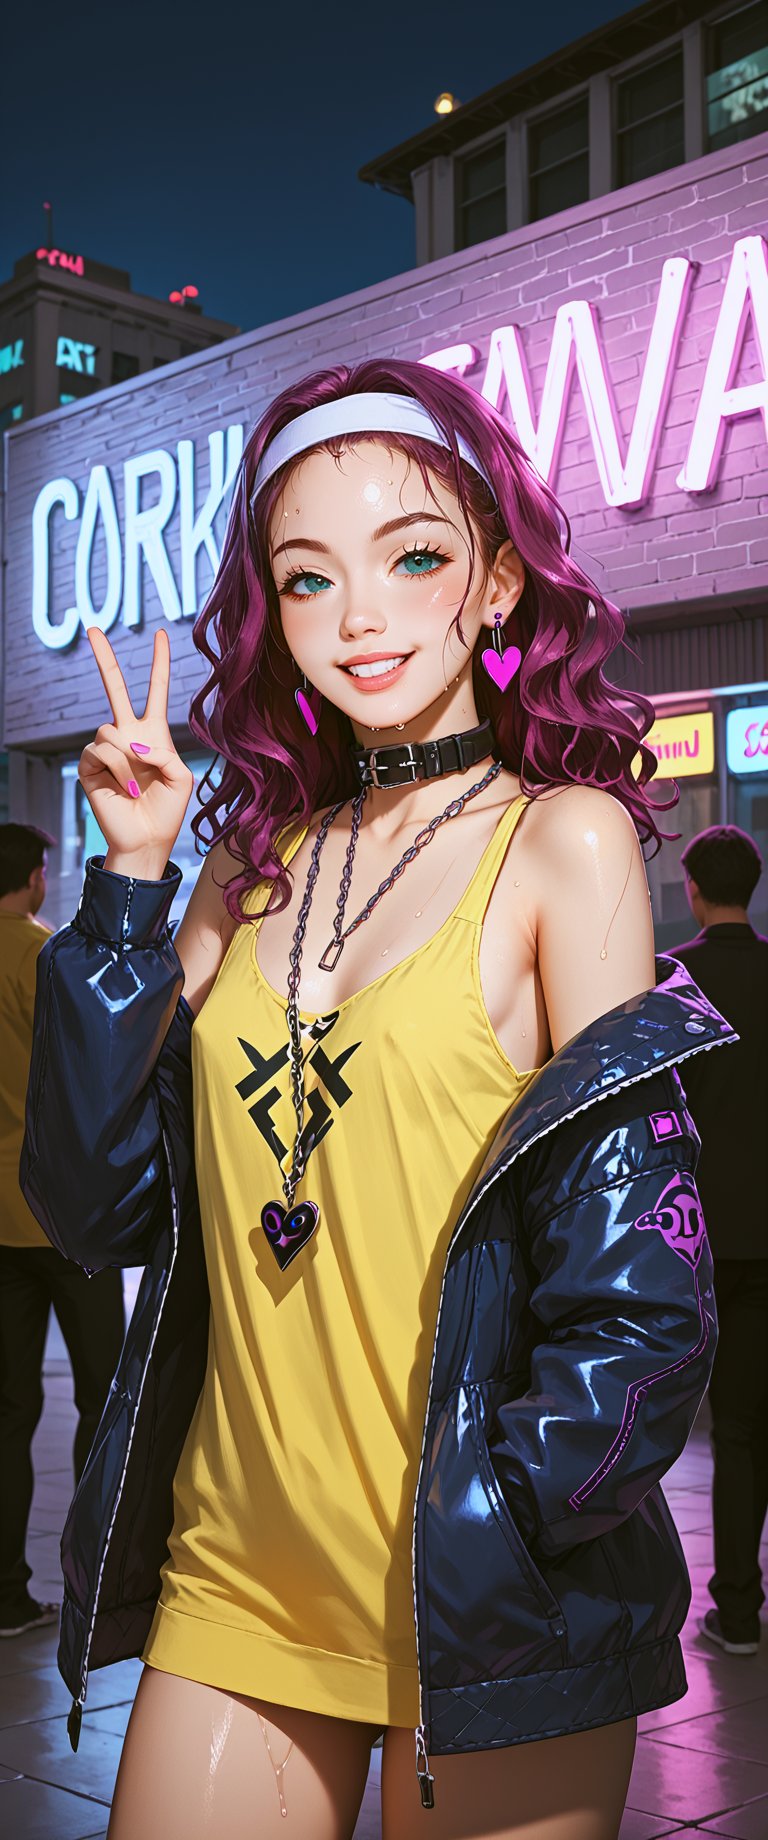 In a vibrant, neon-lit cityscape, a young woman with long, wavy hair and a mischievous grin, stands confidently amidst the urban night. She wears a black vinyl jacket, adorned with chunky chains and a collar of tiny tachuelas. Her white headband is tied around her forehead, holding back her wet locks. A DRONE 26K inscribed yellow tank top clings to her toned physique.

As she proudly holds up her hand in a V sign near her face, two purple hearts are painted on her cheeks, matching the playful tone of her outstretched tongue. Her large, rounded pink earrings bounce with each subtle movement.

The city's towering skyscrapers and bustling streets provide a futuristic backdrop, with neon lights reflecting off the wet pavement. The atmosphere is electric, capturing the carefree essence of this rebellious cyberpunk heroine, standing tall and unapologetic in her freedom and joy.,score_9